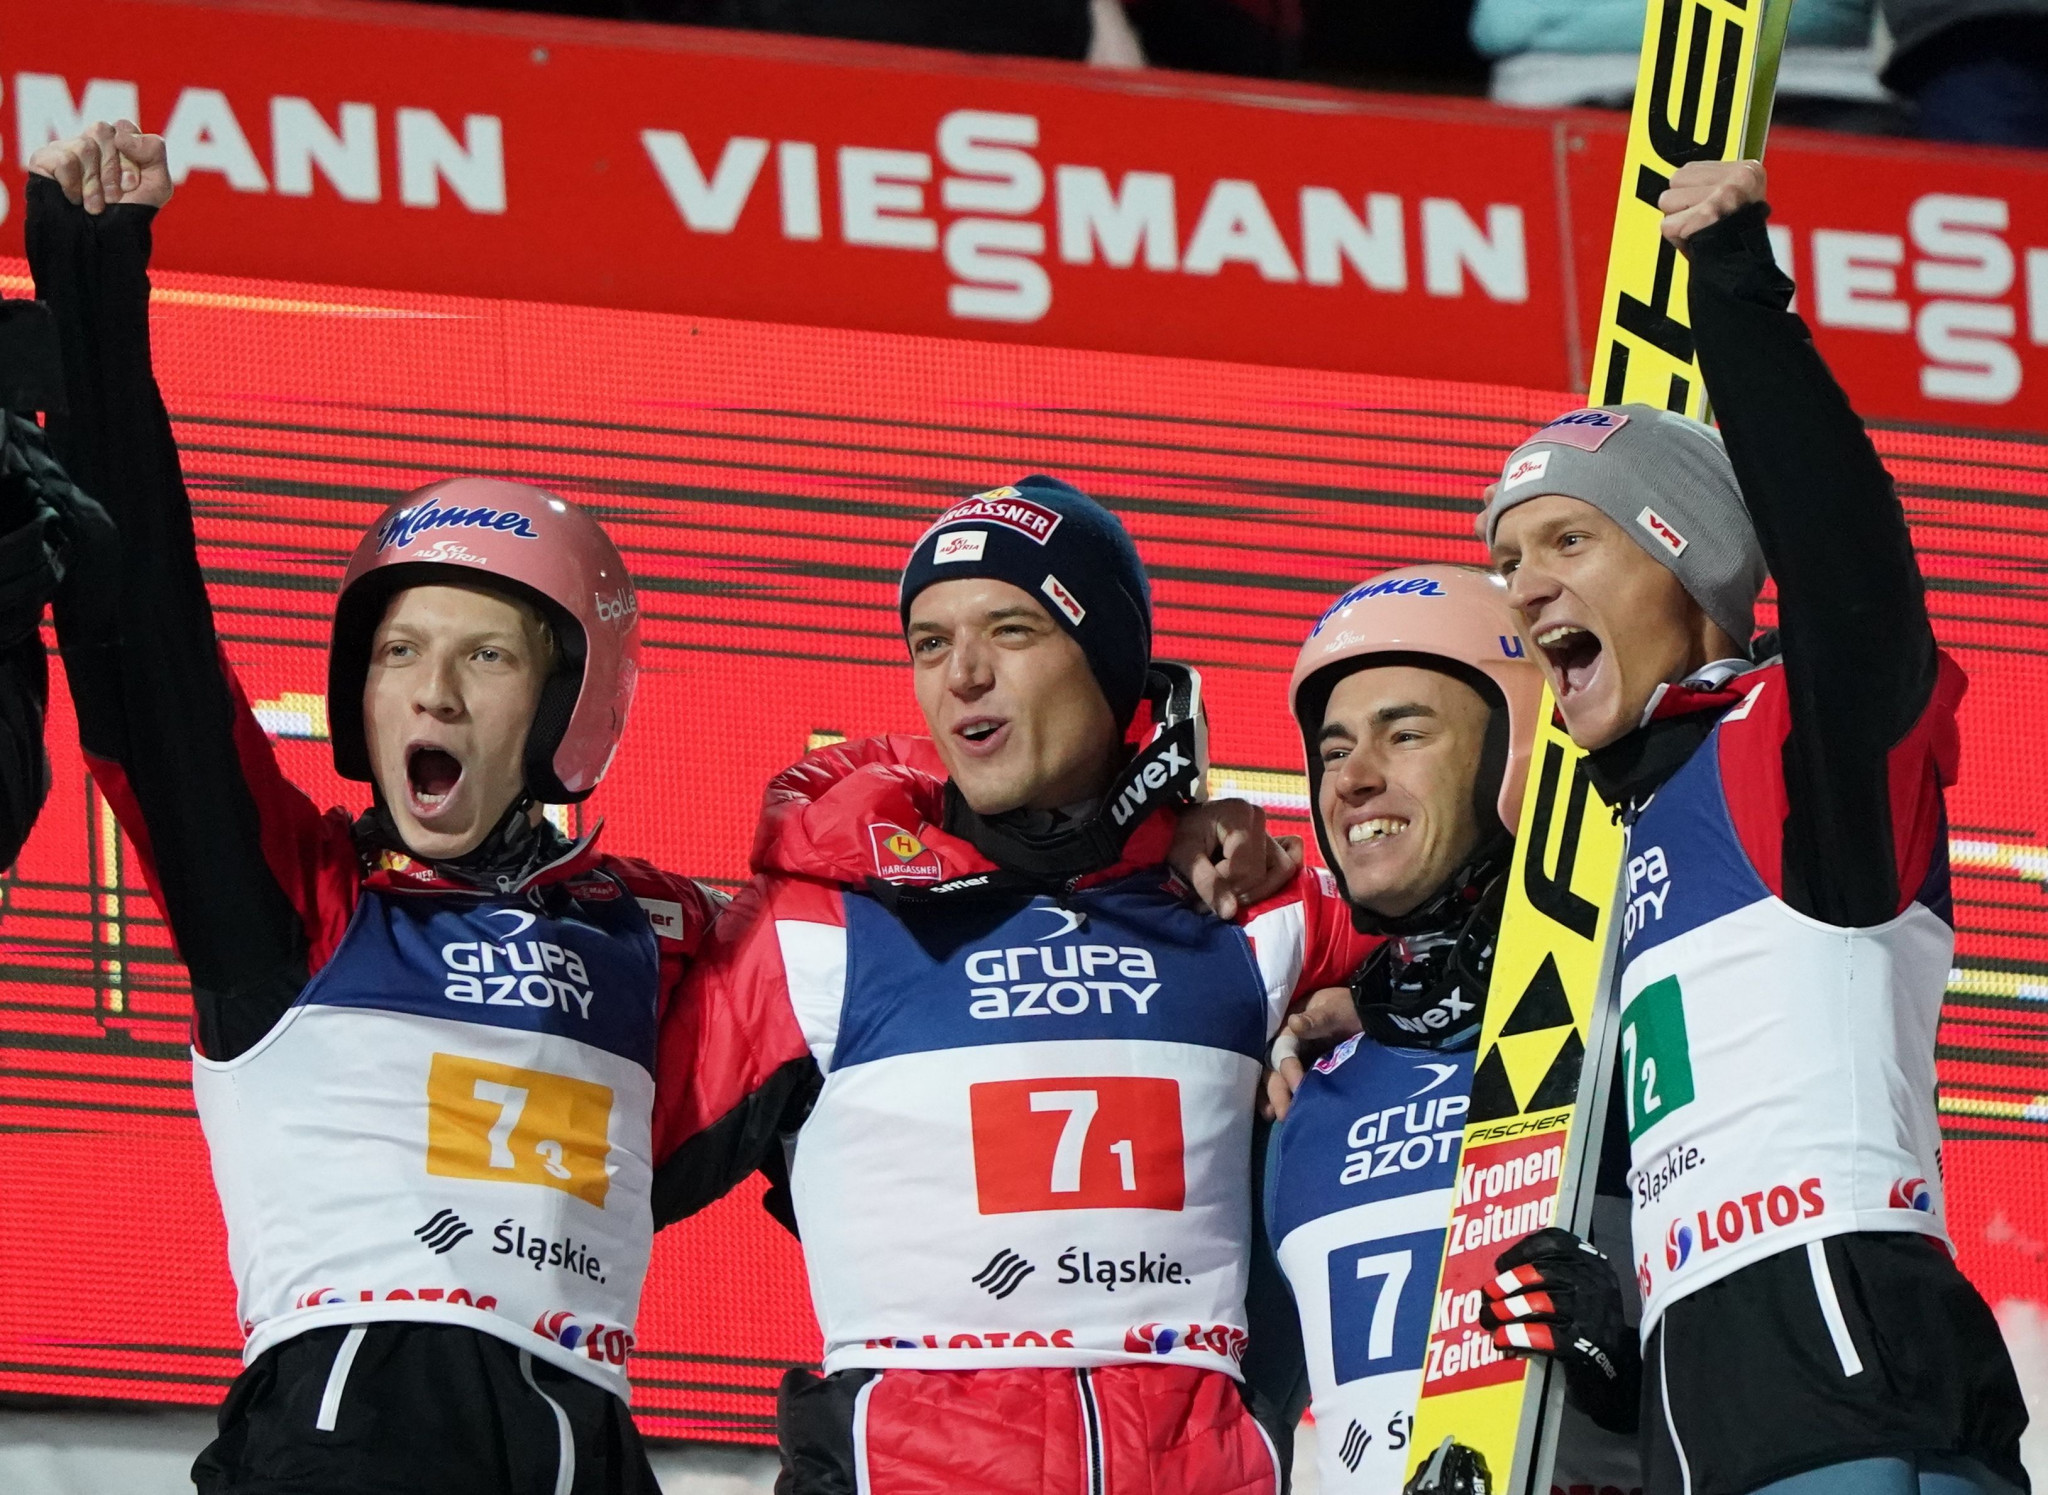 Austria won the team event on the first day of the season ©Getty Images